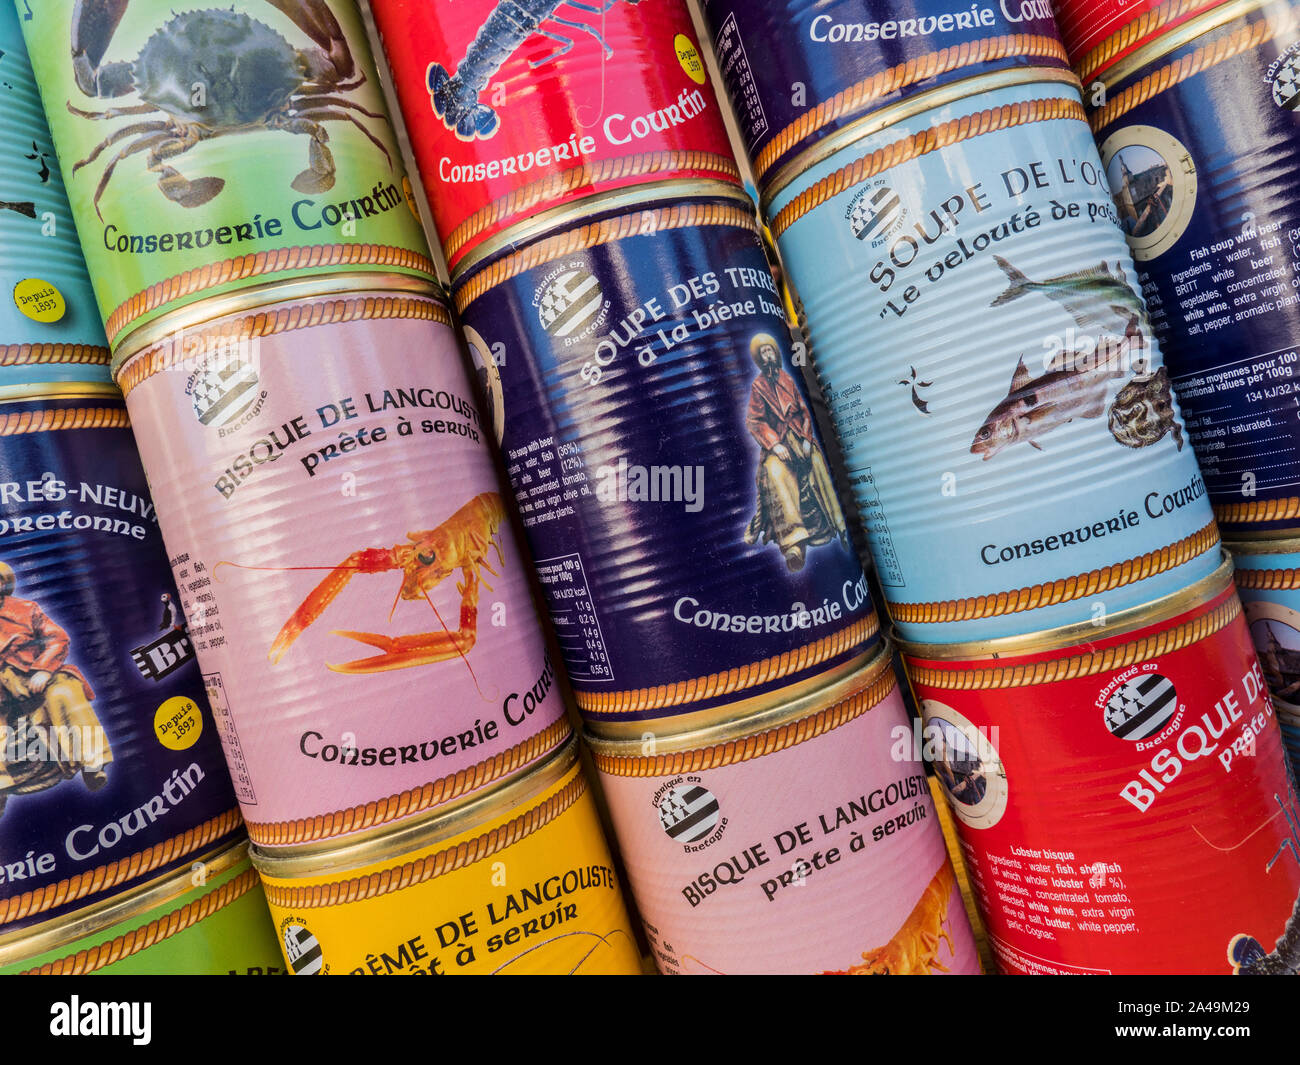 FISH SOUP CANS local canned speciality lobster bisque French Brittany soups on display for sale at Pont-Aven Brittany France Stock Photo